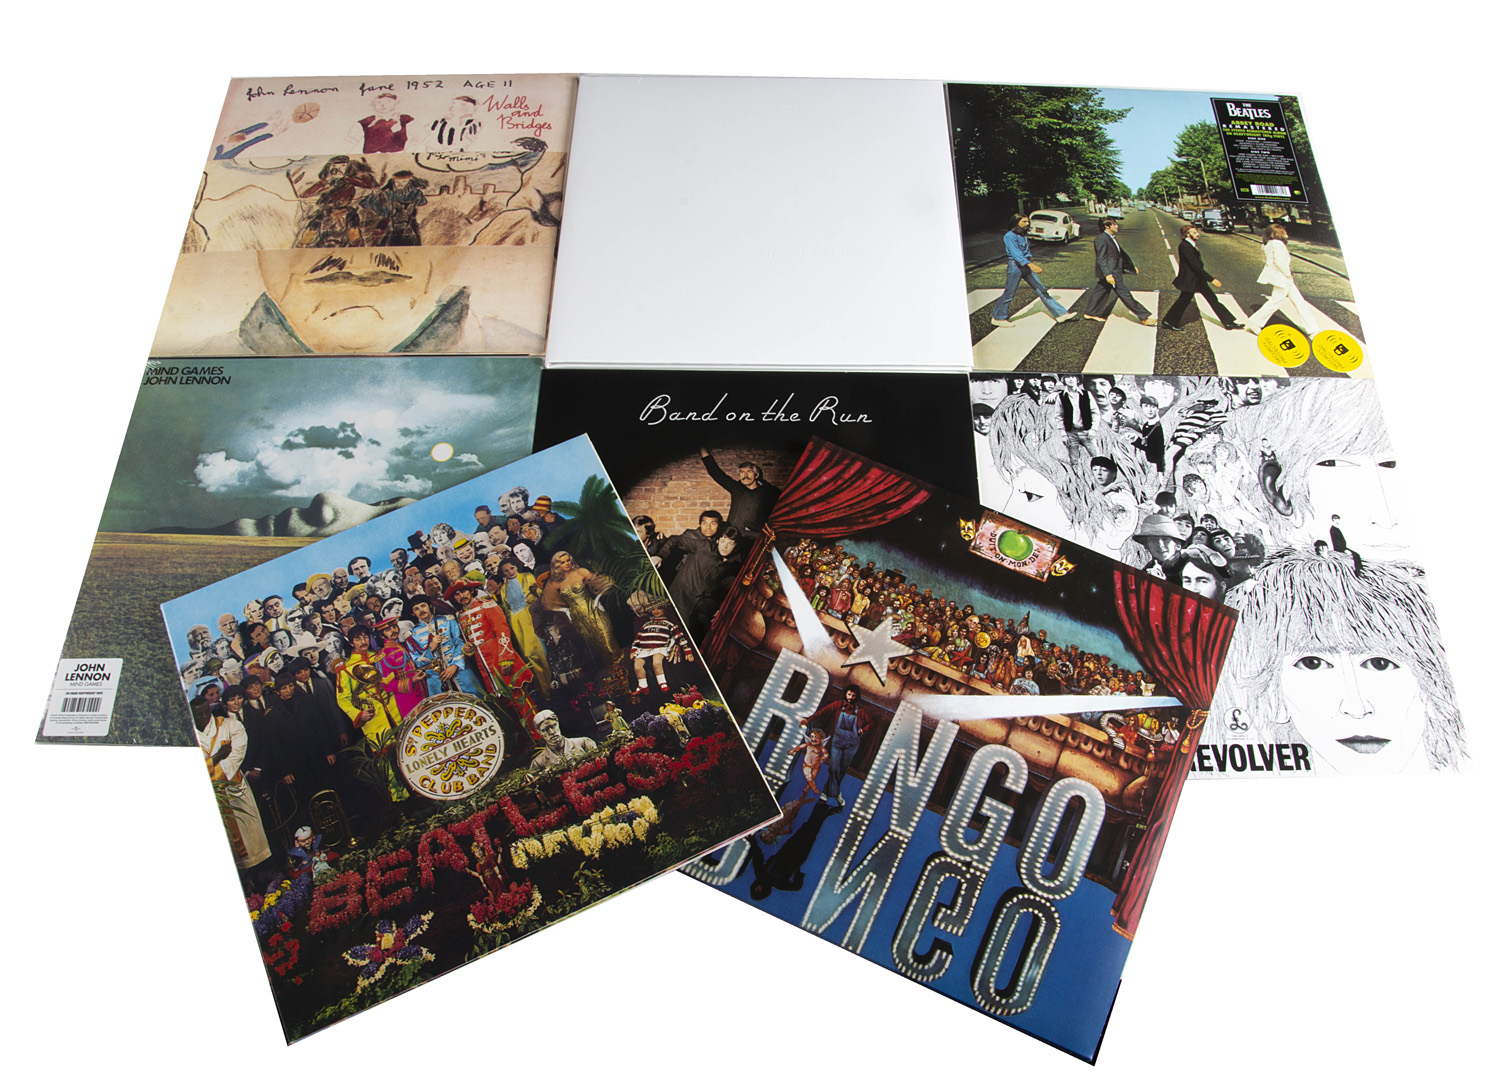 Beatles / Solo LPs, eight Remastered albums comprising Abbey Road, White Album, Revolver, Sgt